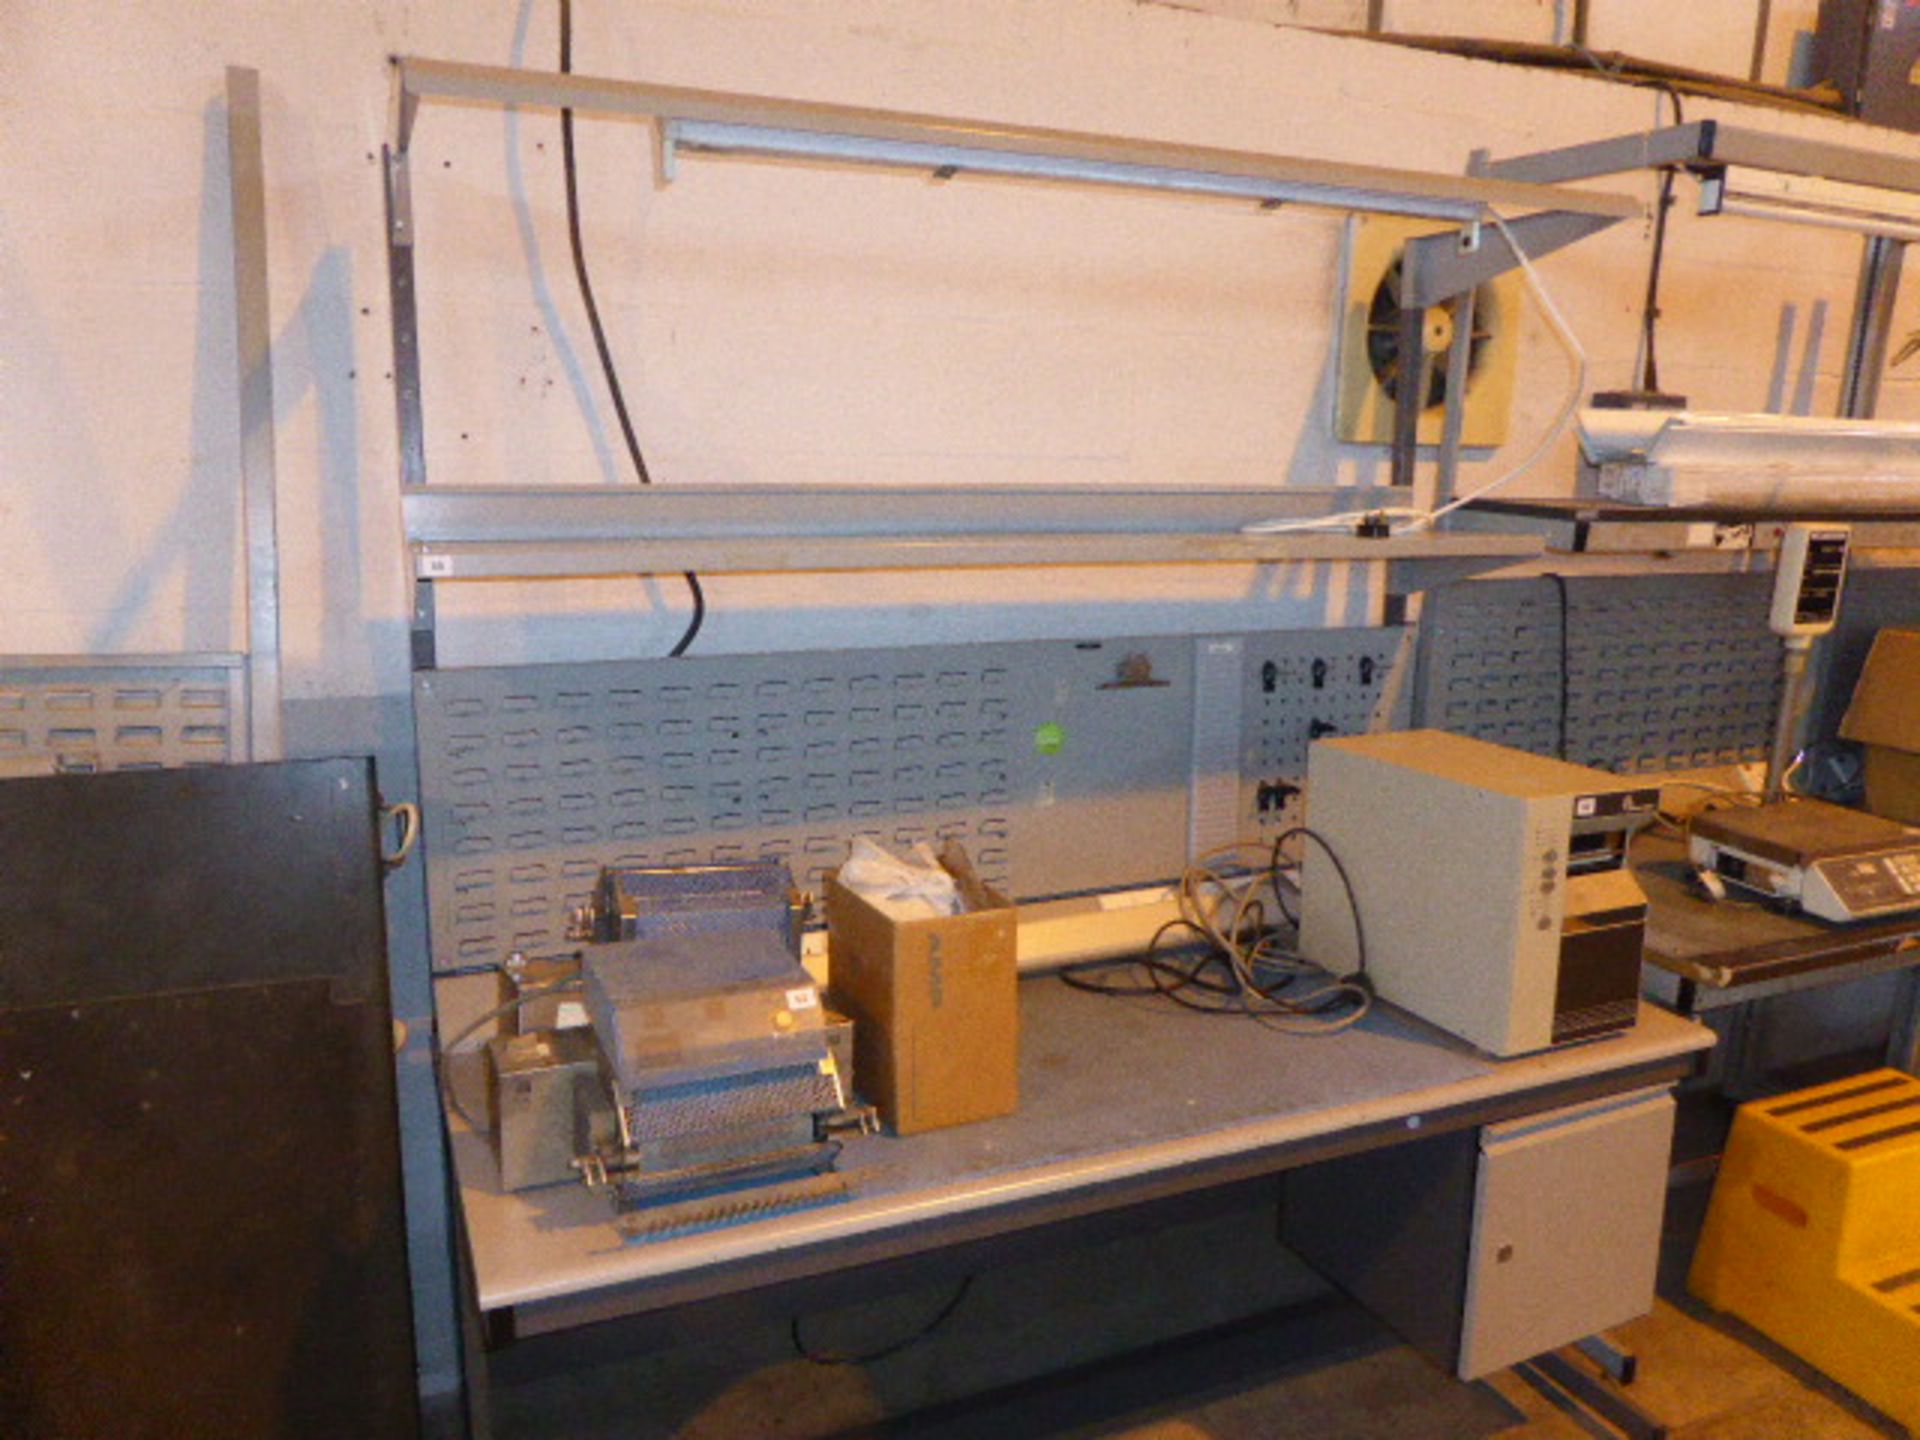 3 electronic engineers test benches together with a similar disassembled unit, 2 cherry pedestals - Image 2 of 2